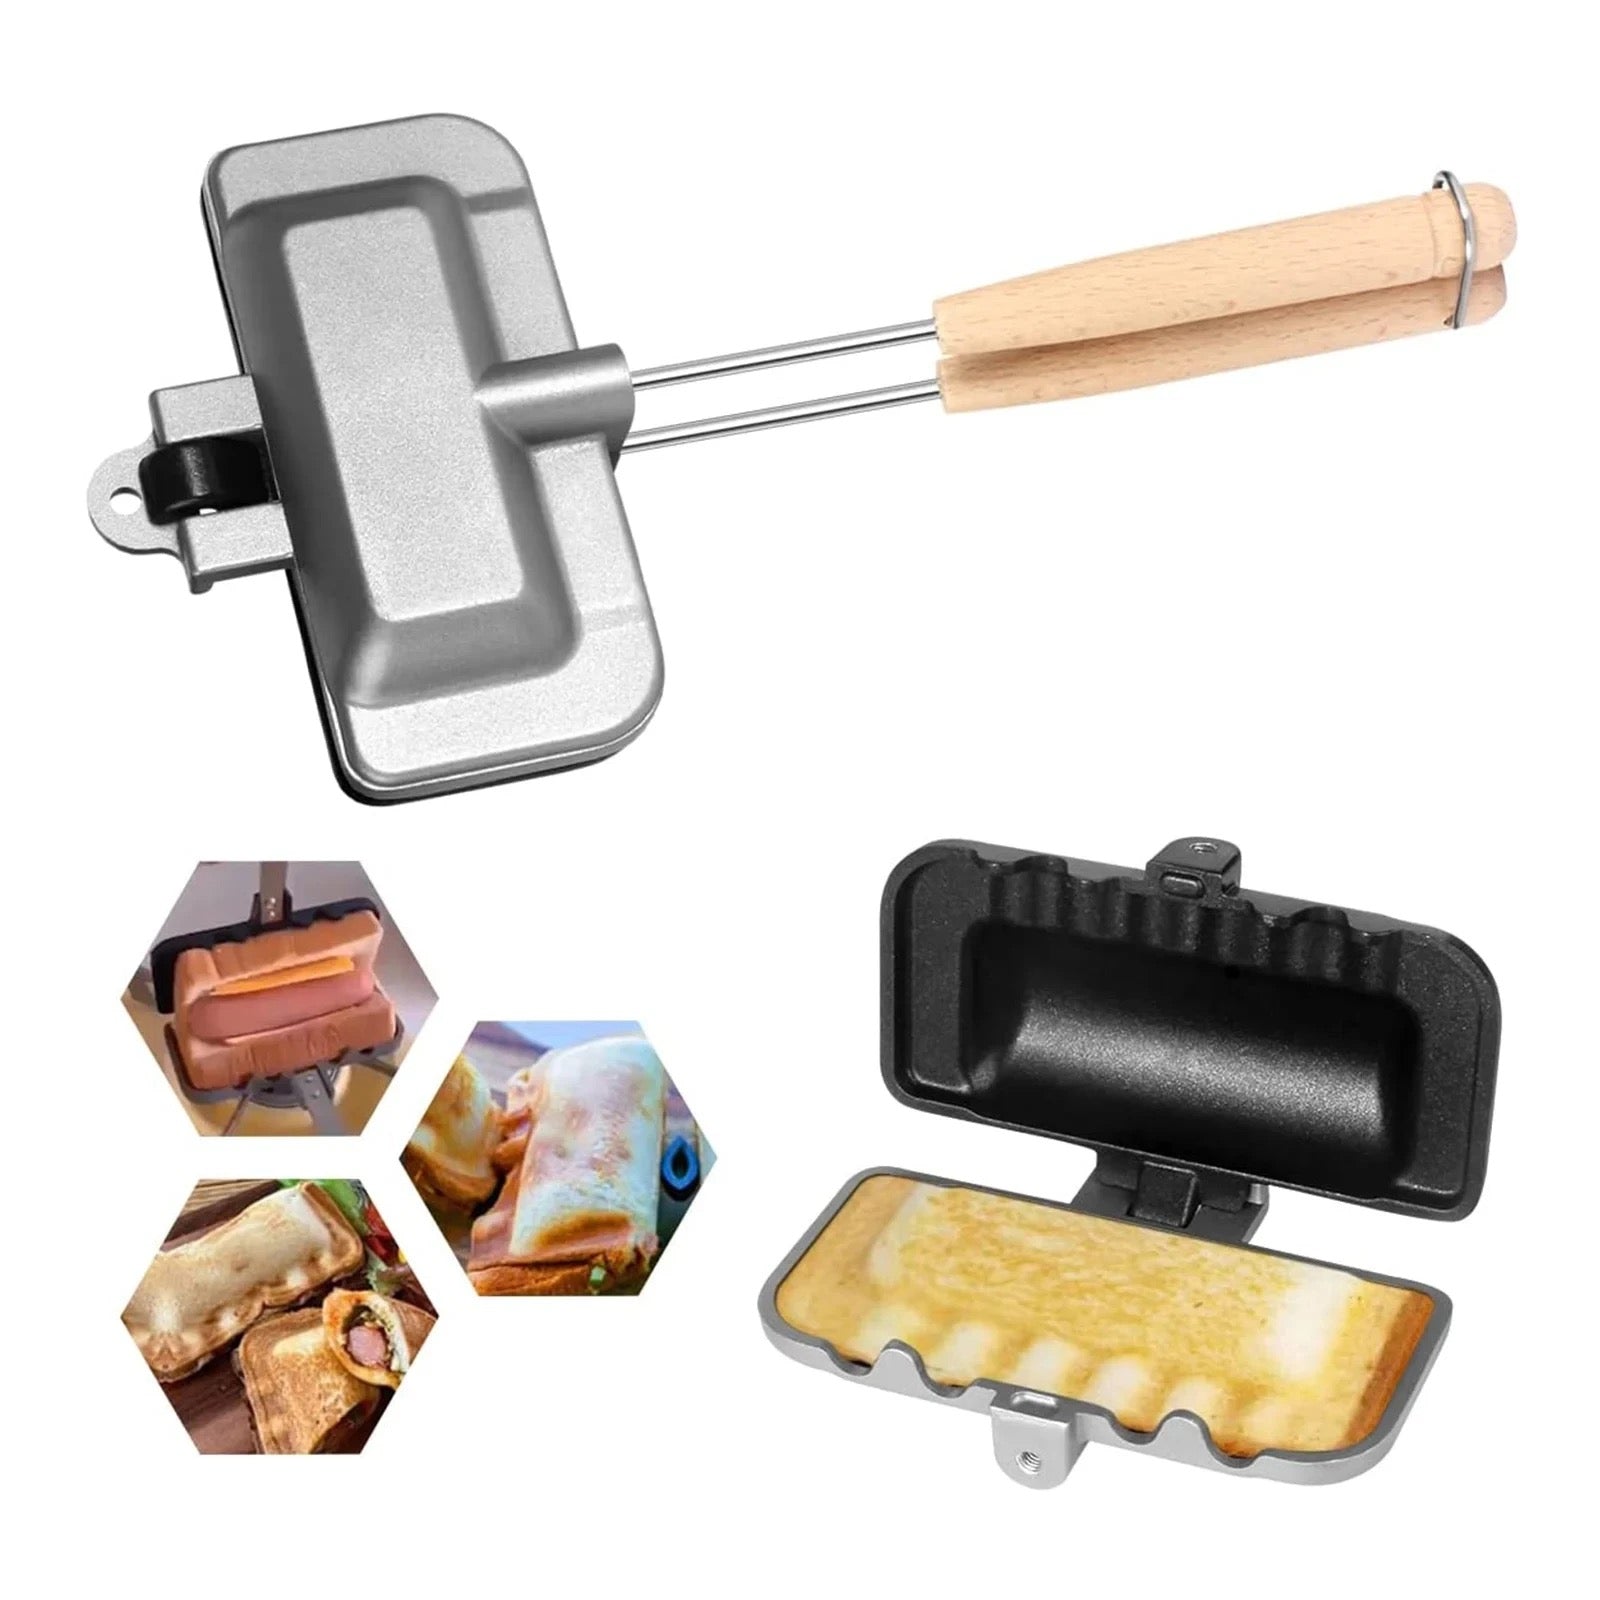 Double-Sided Breakfast Sandwich Maker - Product detailed view